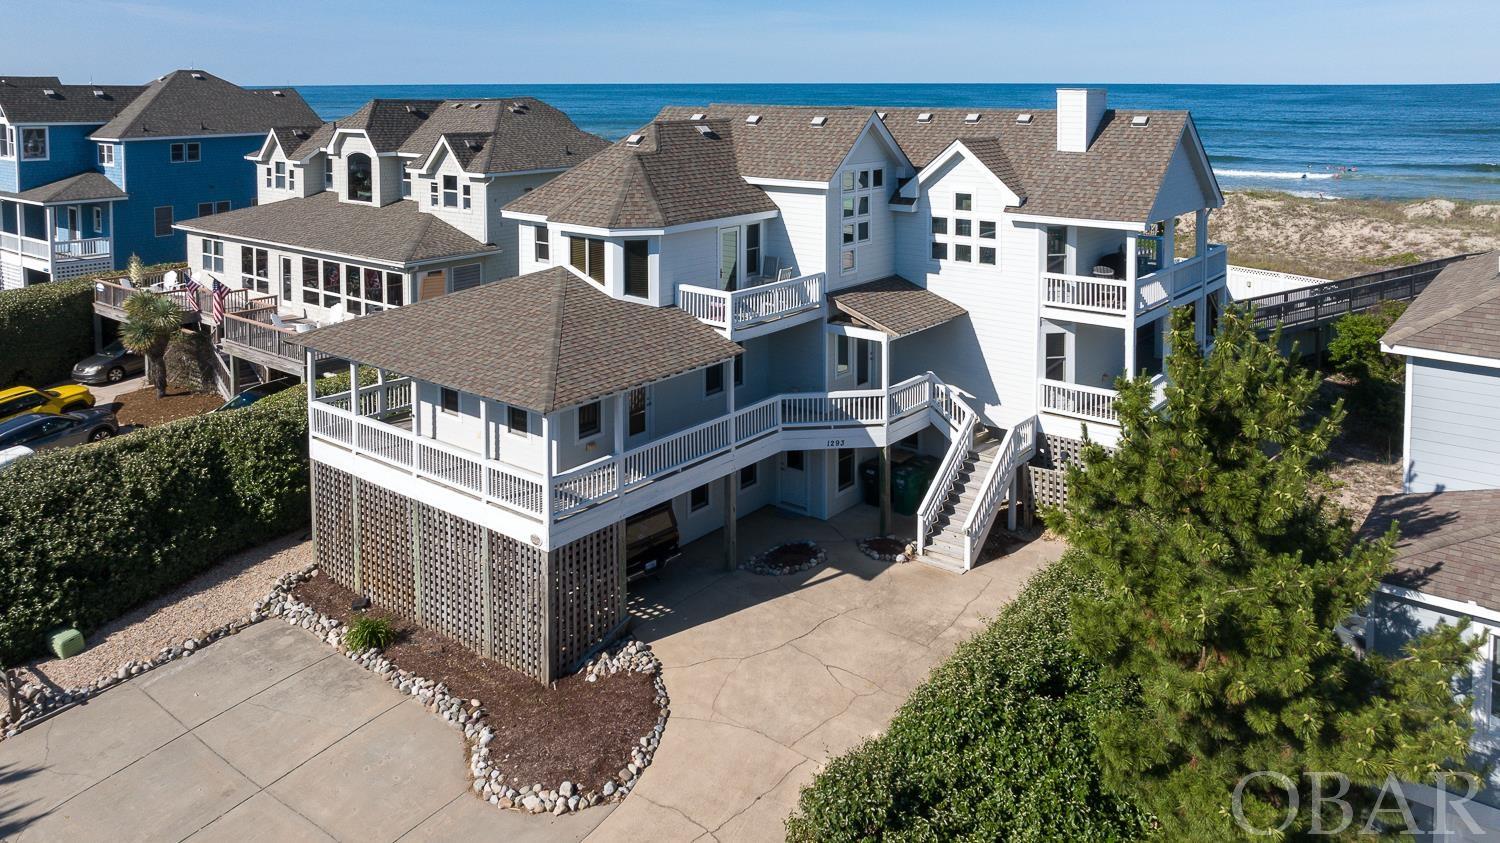 Ocean views abound at this 7 bedroom home in northern Corolla. Located on a huge, elevated oceanfront lot, this home was lovingly used only as a second home, and the house is NOT currently in a rental program (minimal wear and tear) but is projected to do over $296,000+ a year in rental income! The meticulous owners have been updating over the recent years with a HUGE heated concrete pool and spacious pool deck/cabana, a new kitchen with granite countertops and stainless appliances, select new siding and exterior paint, and newer HVACs. Well appointed and designed to take in the view, the home has a reverse floor plan with the top level hosting the open kitchen, dining and living room, all overlooking the Atlantic Ocean. The generous Oceanside decks on the top level and mid-level look out over the pool area and across the wide dune to the beach. On the third floor you’ll also find a half bath and an en-suite king bedroom overlooking the sunset views to the west. The mid-level has 4 bedrooms total, two of which have their own private bathrooms with Jacuzzi tubs, and access to the ocean-side deck. On the ground level you’ll find 2 more bedrooms, a recently remodeled full bathroom, and a large game room with kitchenette and plenty of room to add your own pool table, ping pong table or foosball table! From the rec room, step outside to enter the large fenced in pool deck with shaded cabana area or walk out on your own private beach walkway complete with dune deck area that provides yet another relaxing area to take in the view of the Atlantic Ocean. With ample parking, this home is a comfortable and spacious beach getaway that also provides a great investment opportunity! Located in the Villages at Ocean Hill, you're just down the street from the 4x4 beaches where the wild horses roam, and historic Corolla Village & Shops and even the Currituck Lighthouse! Also enjoy the premier Villages at Ocean Hill community amenities including oceanfront & lakefront pools, tennis, basketball and pickleball courts, year-round fitness center, and more! Furnishing updates/costs available upon request.